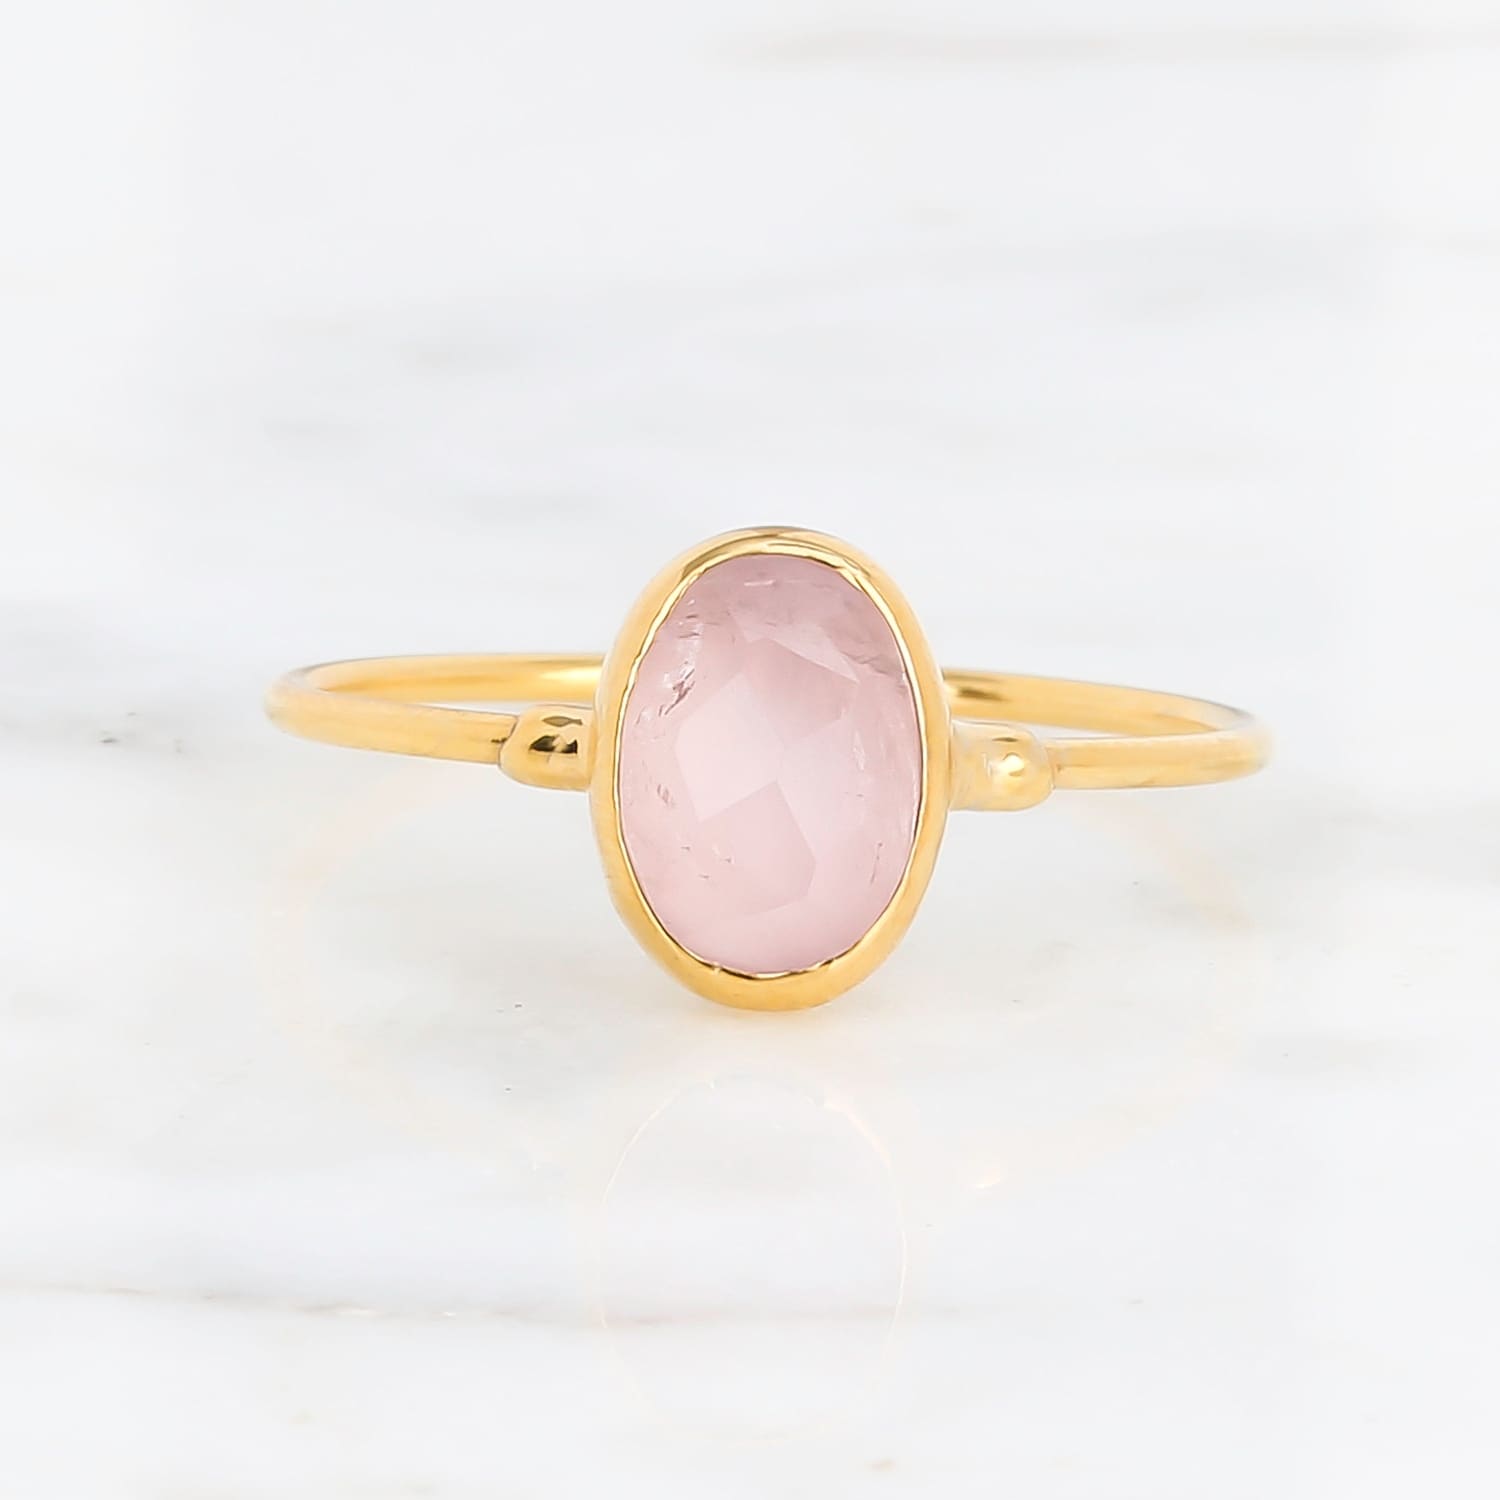 Buy Natural Large Raw Rose Quartz Ring, Raw Pink Quartz Ring, Raw Crystal  Silver Ring, Uncut Gemstone Ring, One of Kind Ring,rose Quartz Jewelry  Online in India - Etsy